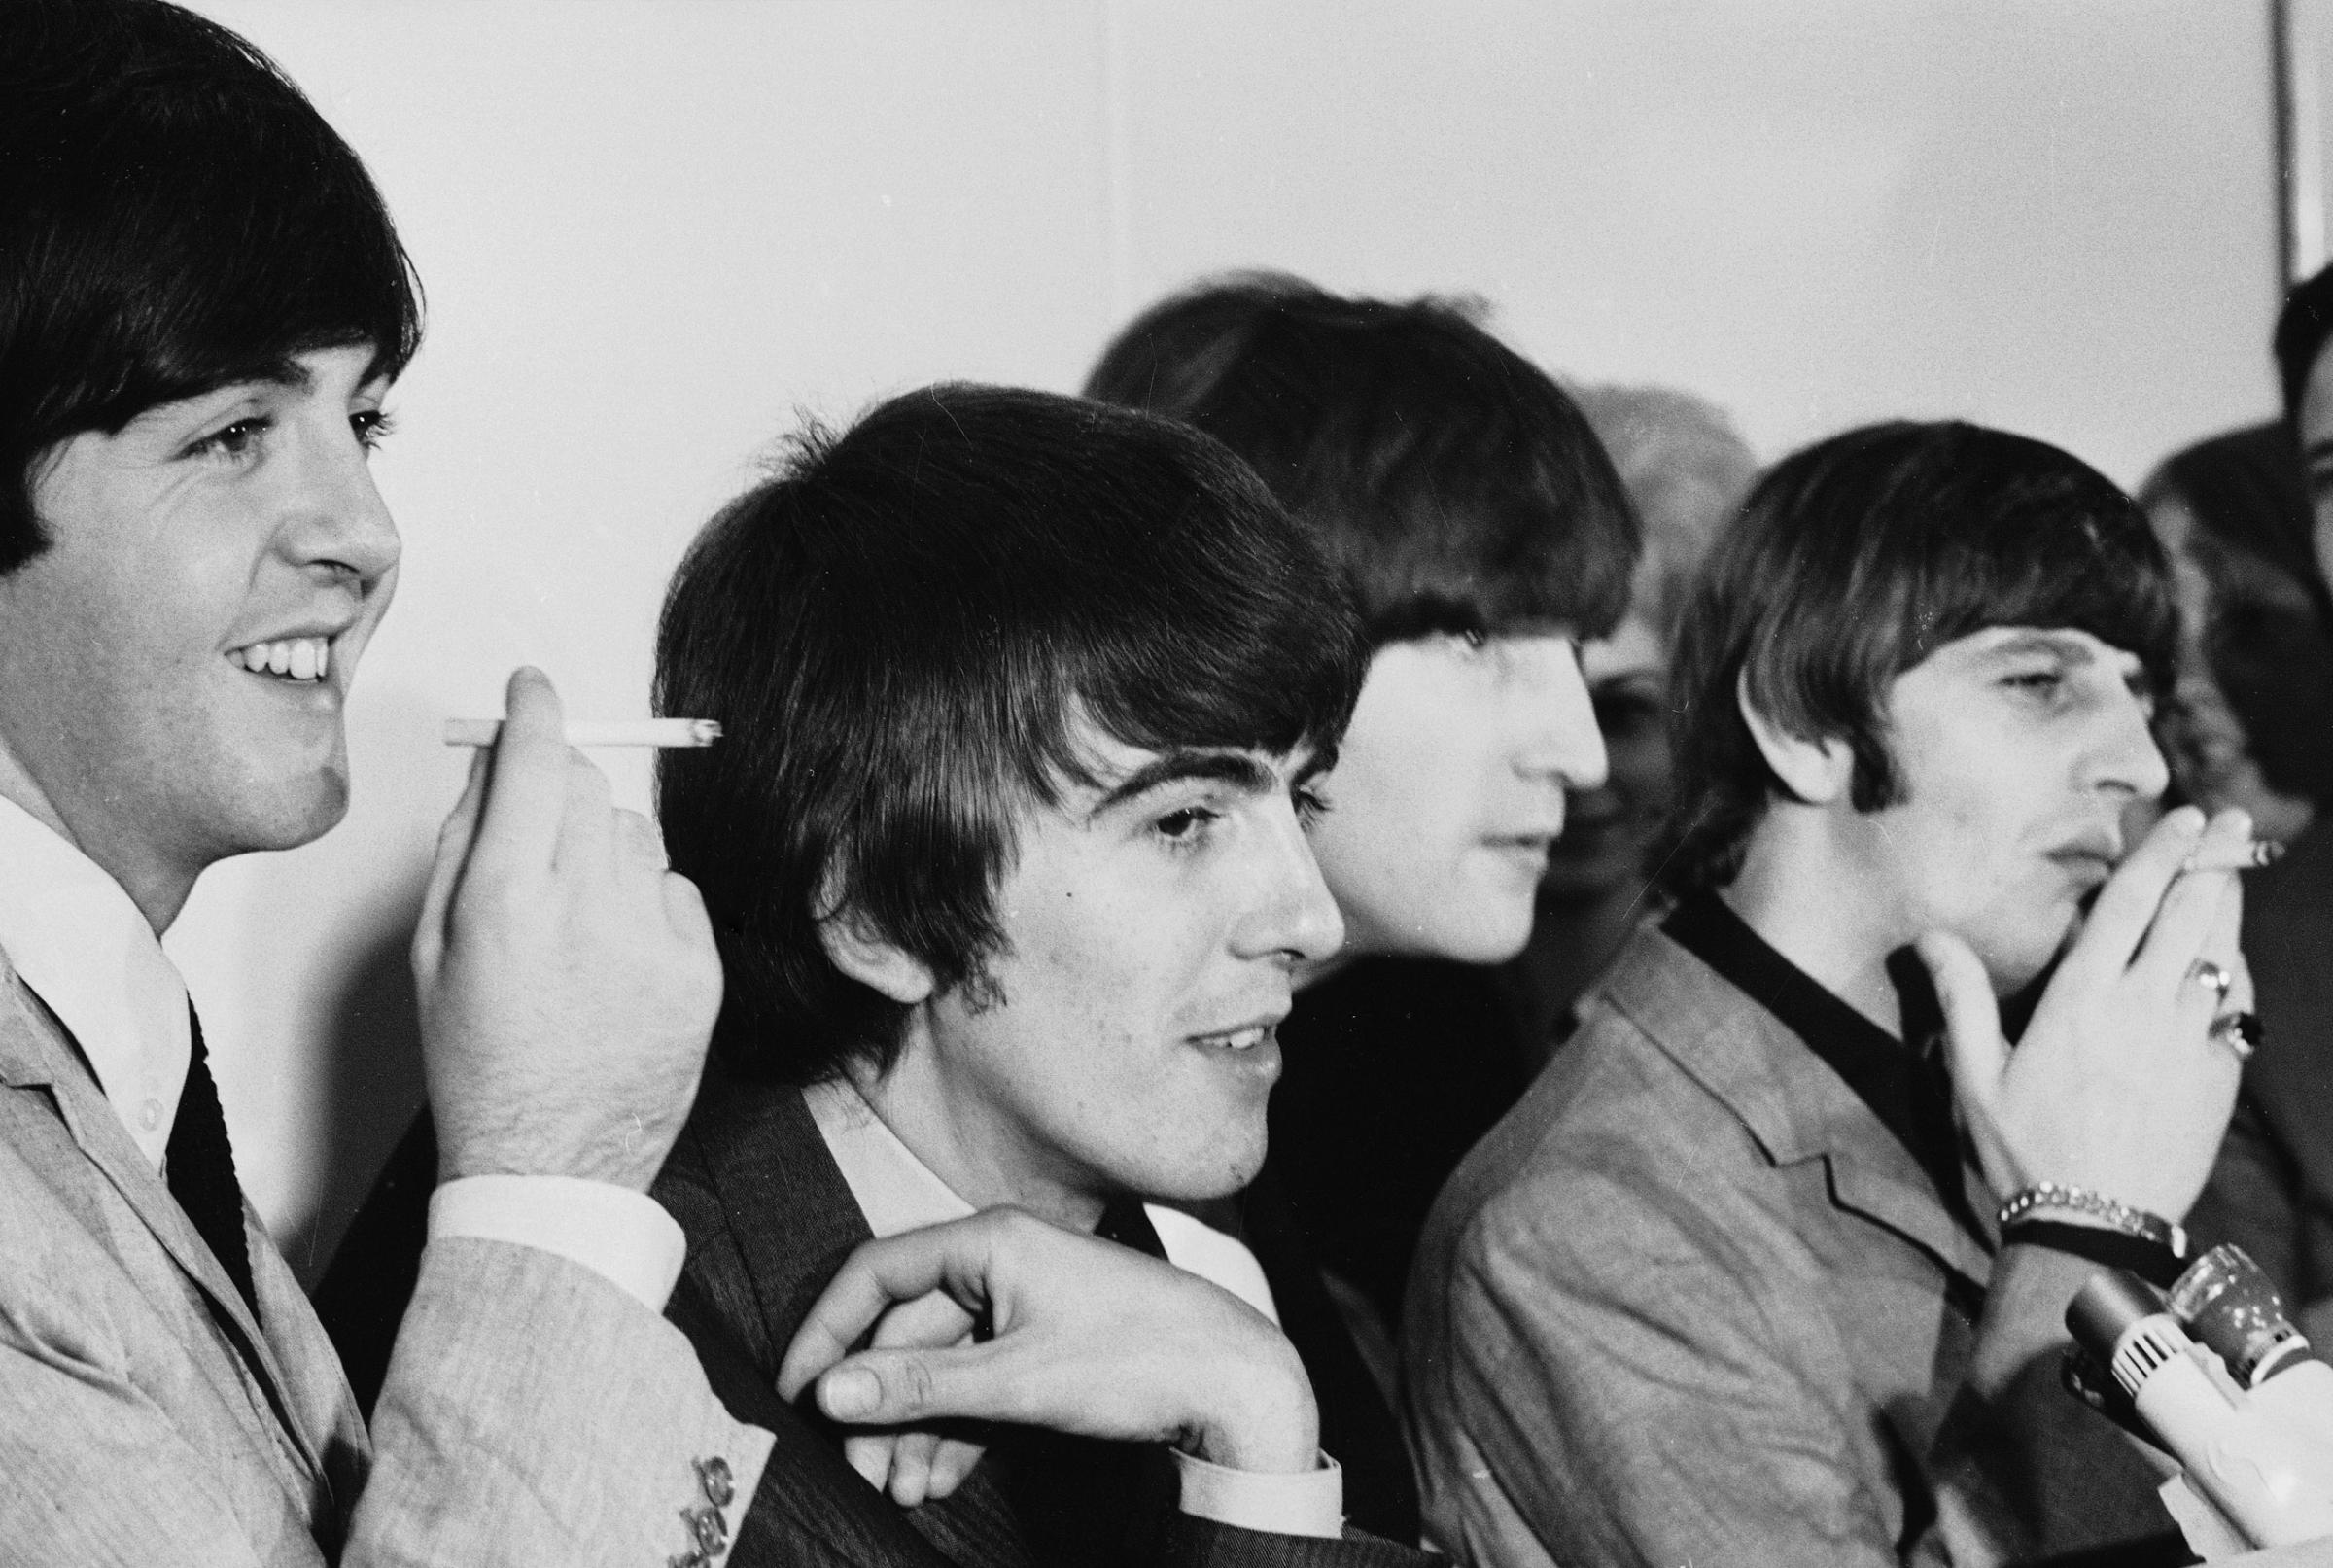 The Beatles joke and smoke at a press date in August 1964.